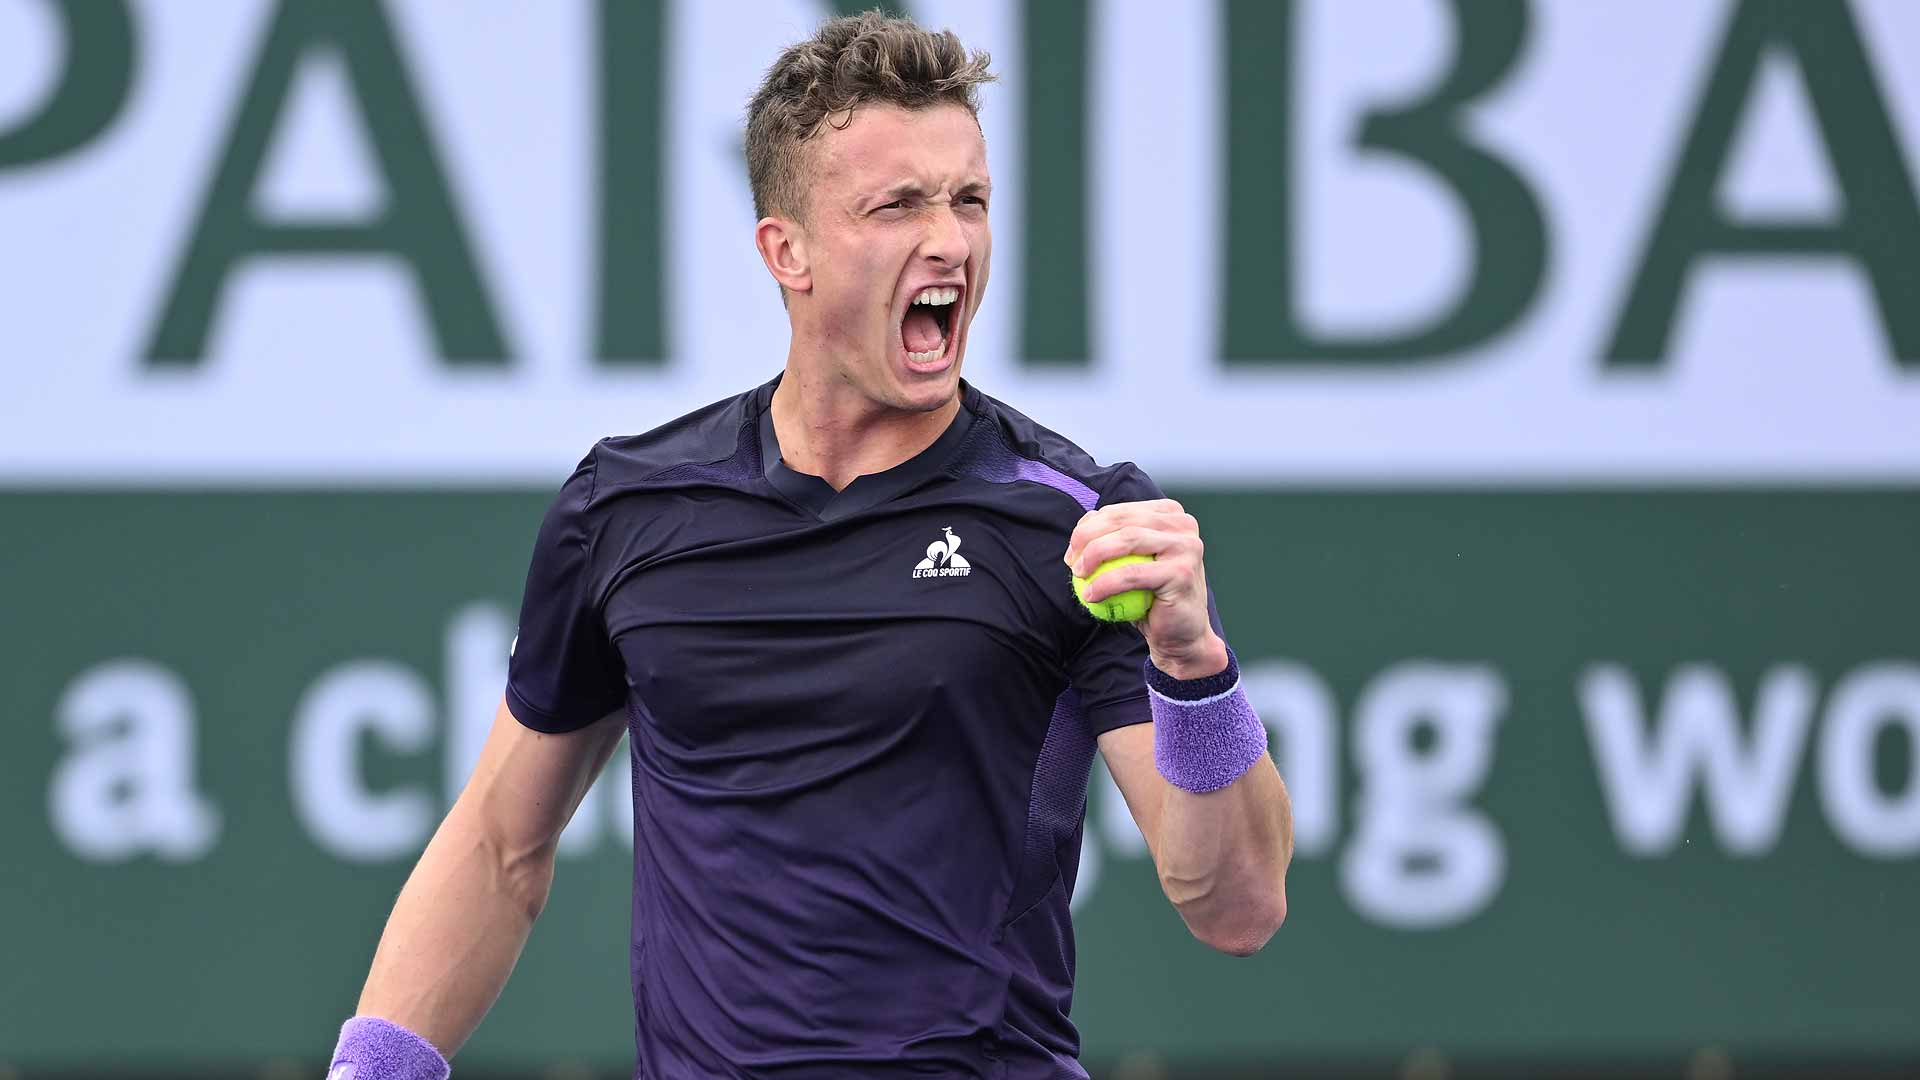 Jiri Lehecka defeats Andrey Rublev Sunday to reach the fourth round at Indian Wells.